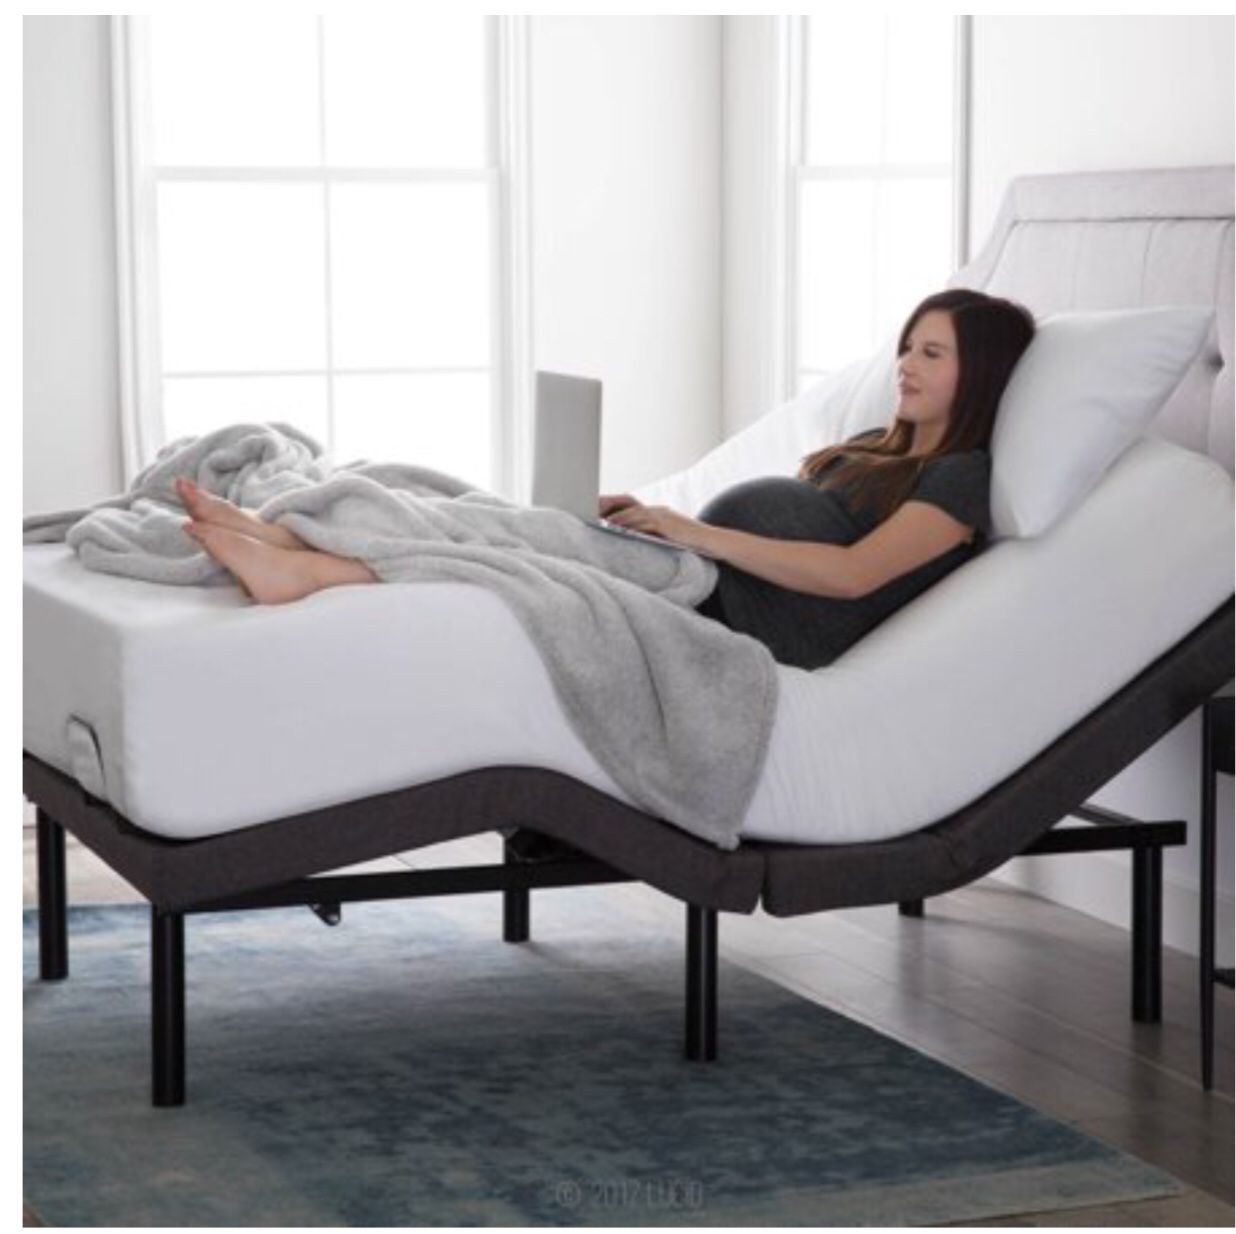 NEW: Lucid L300 Adjustable Bed Base with Dual USB Charging Ports. Selling Frame Only Not Mattress.